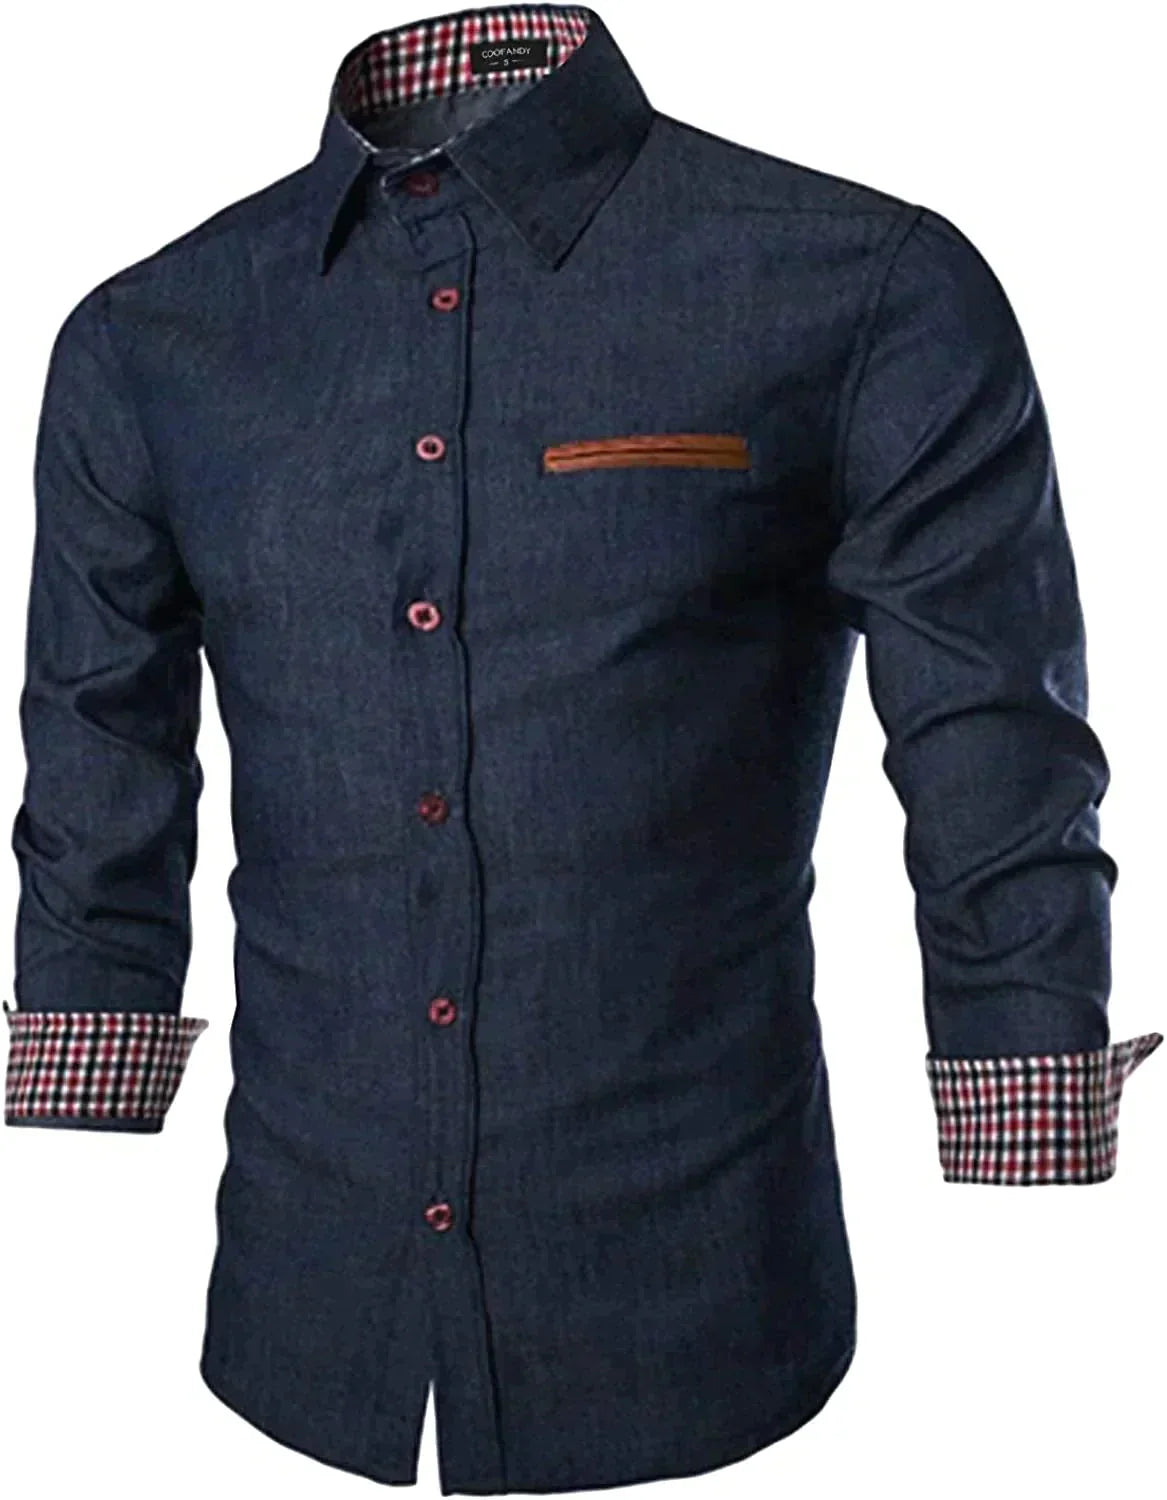 Casual Button Down Denim Shirt with Pocket (US Only) Shirts COOFANDY Store Navy Blue S 